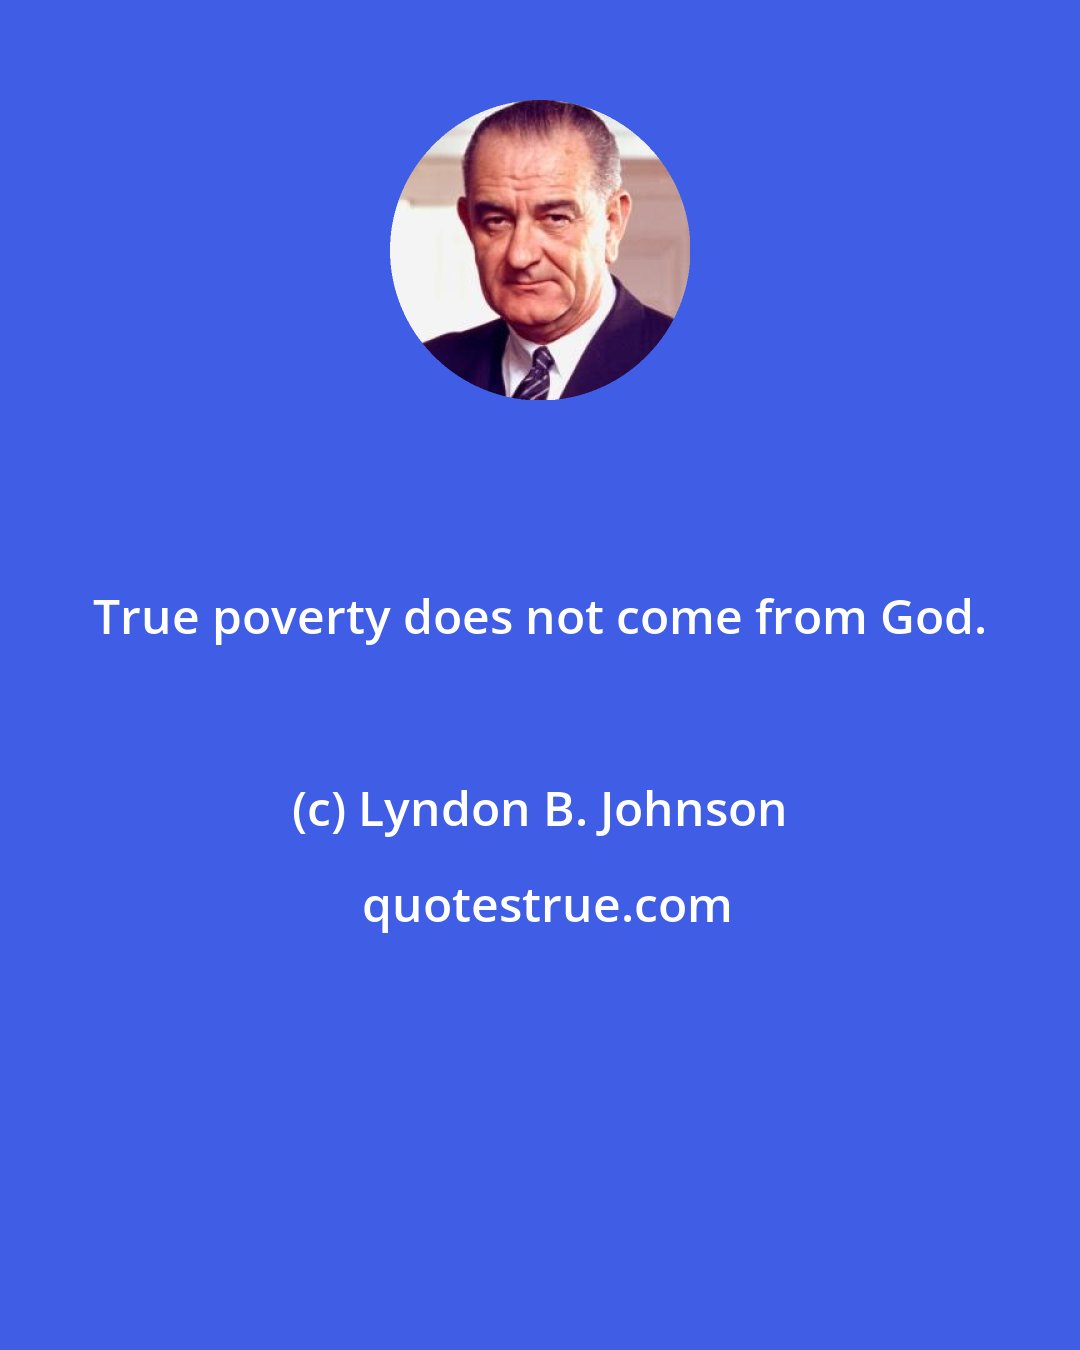 Lyndon B. Johnson: True poverty does not come from God.